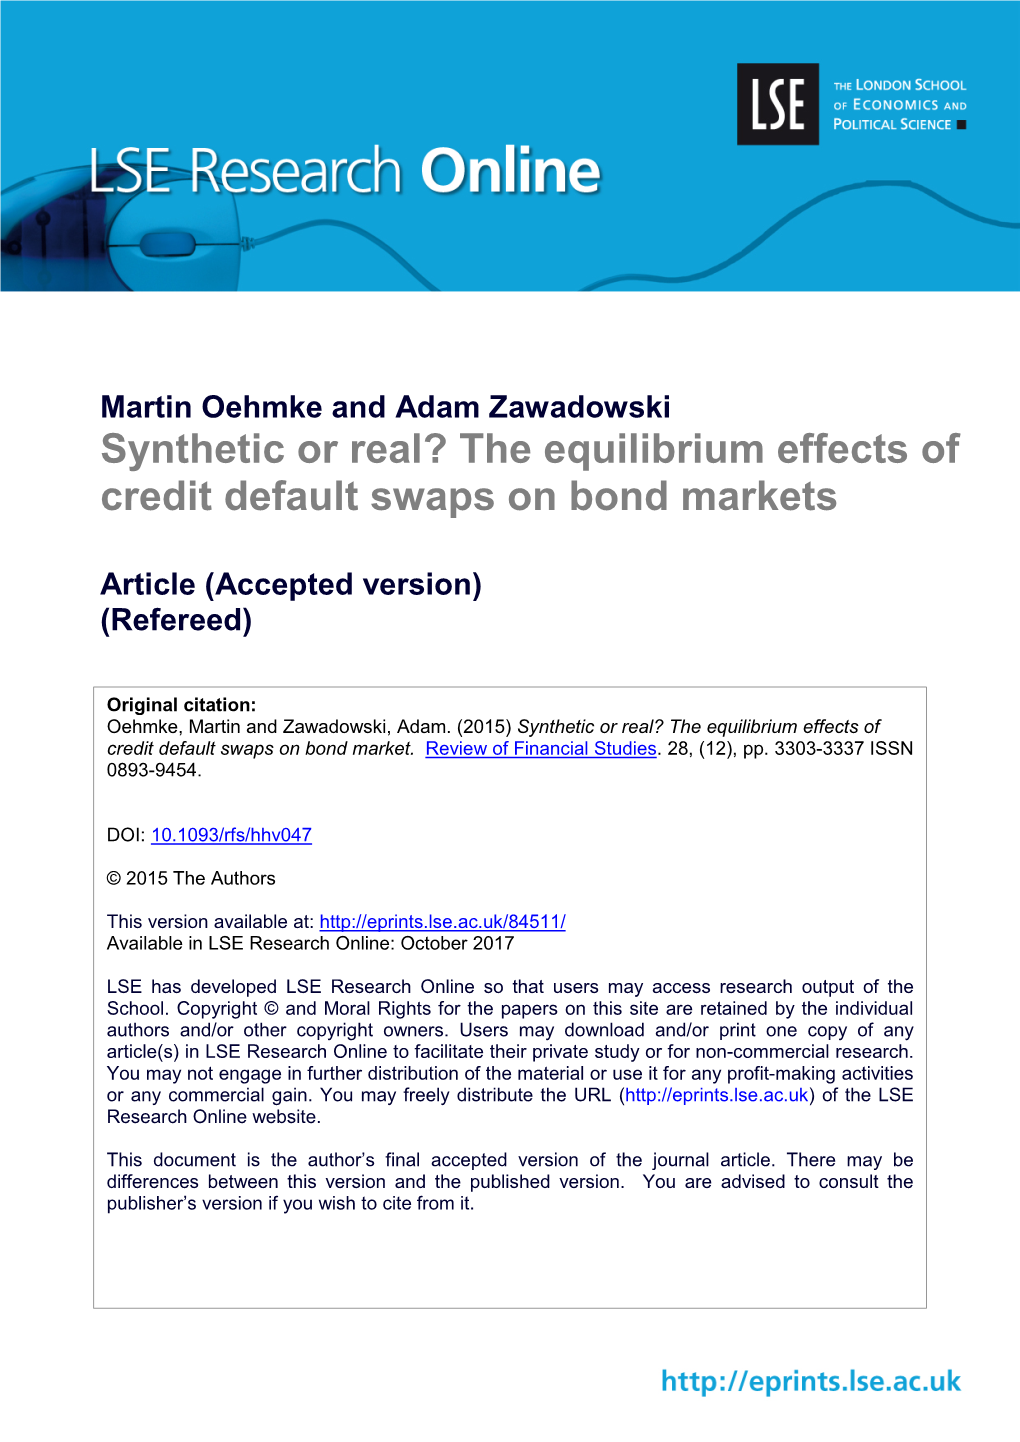 Synthetic Or Real? the Equilibrium Effects of Credit Default Swaps on Bond Markets